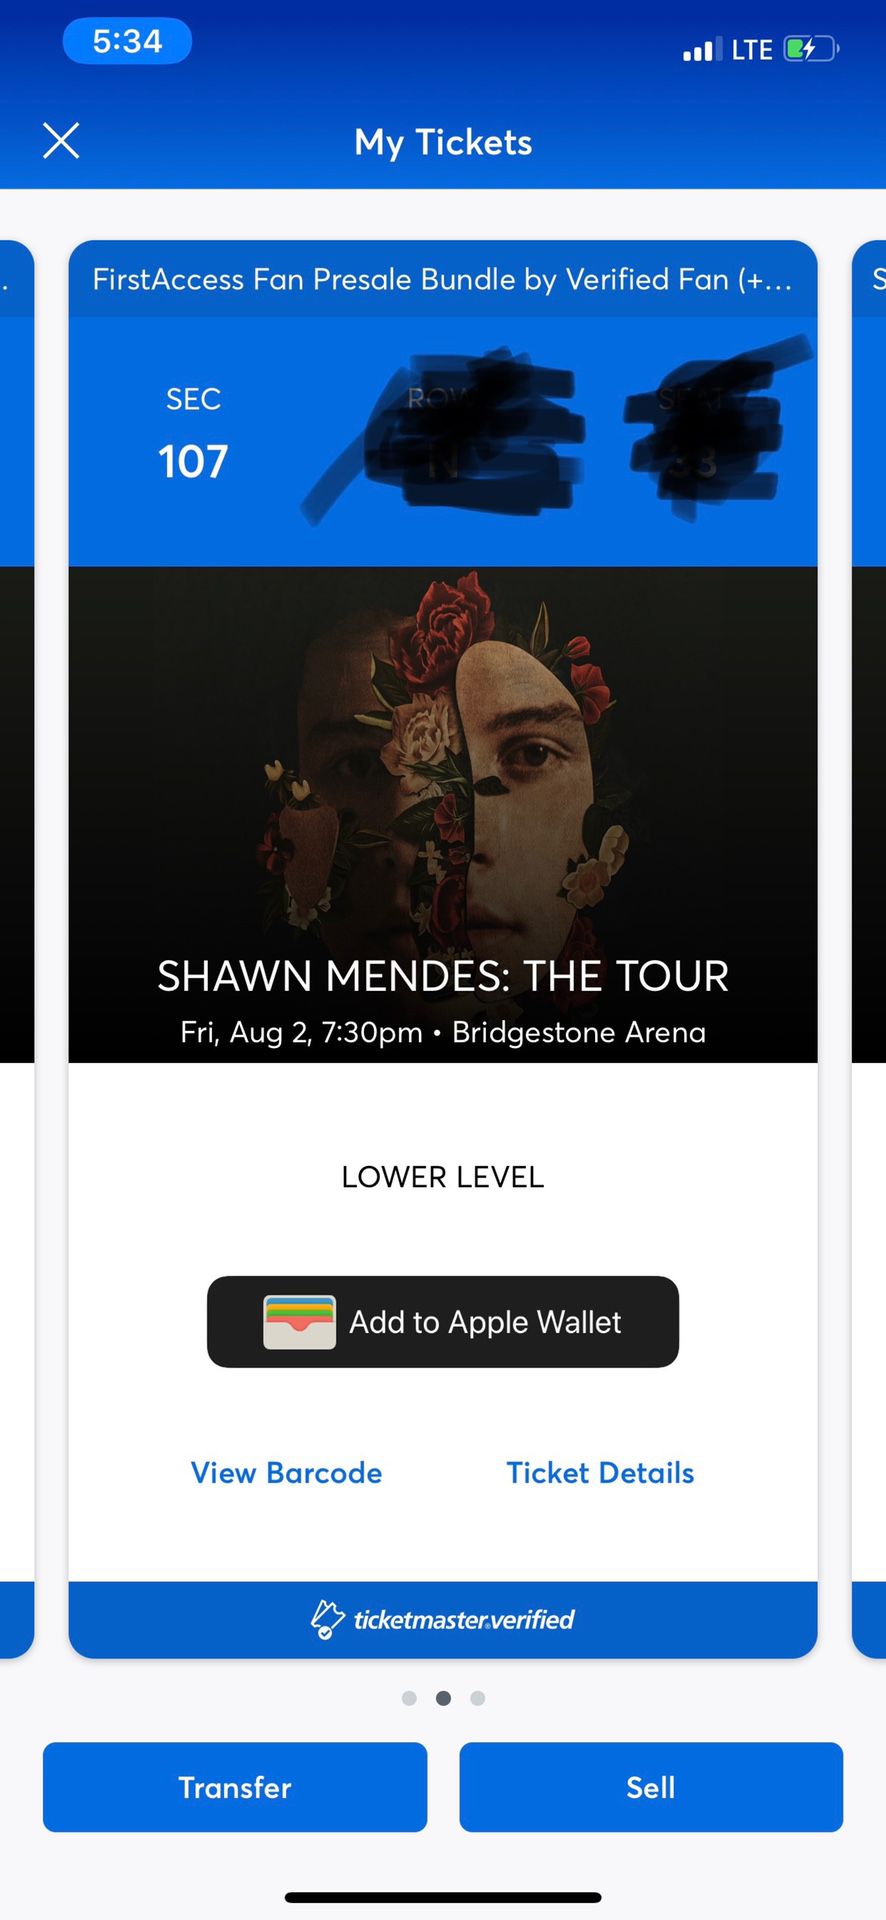 Shawn Mendes Tickets